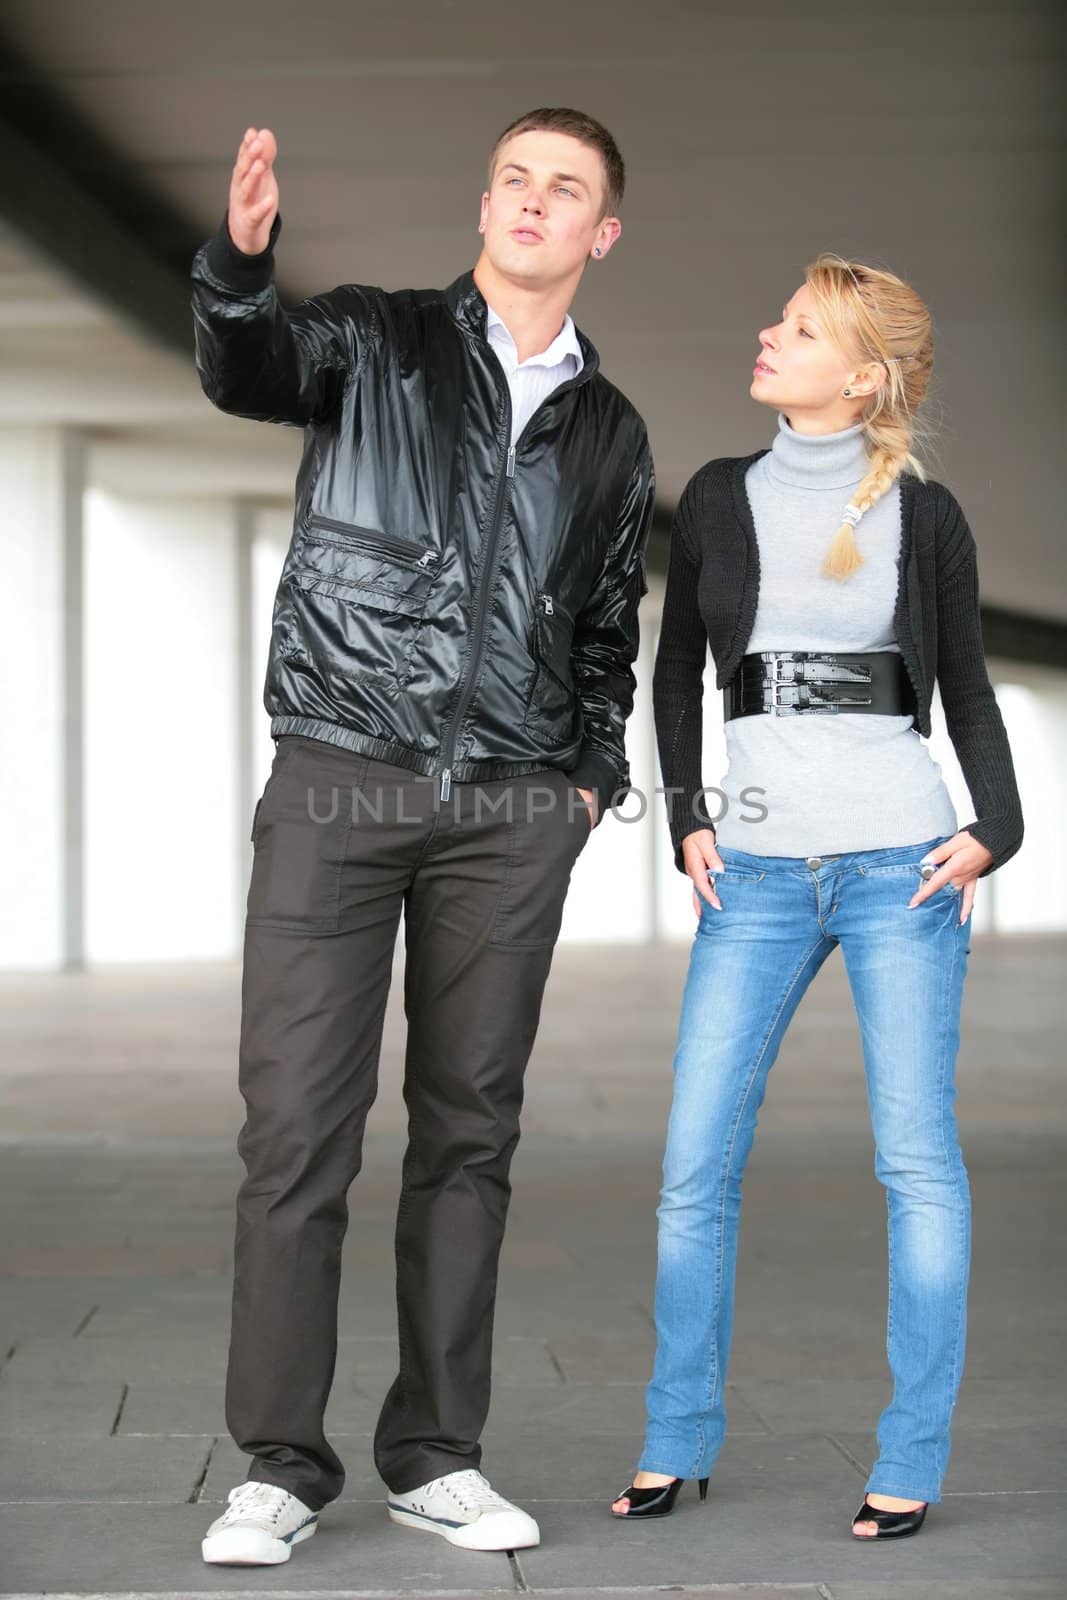 young man in black jacket and girl in blue jeans